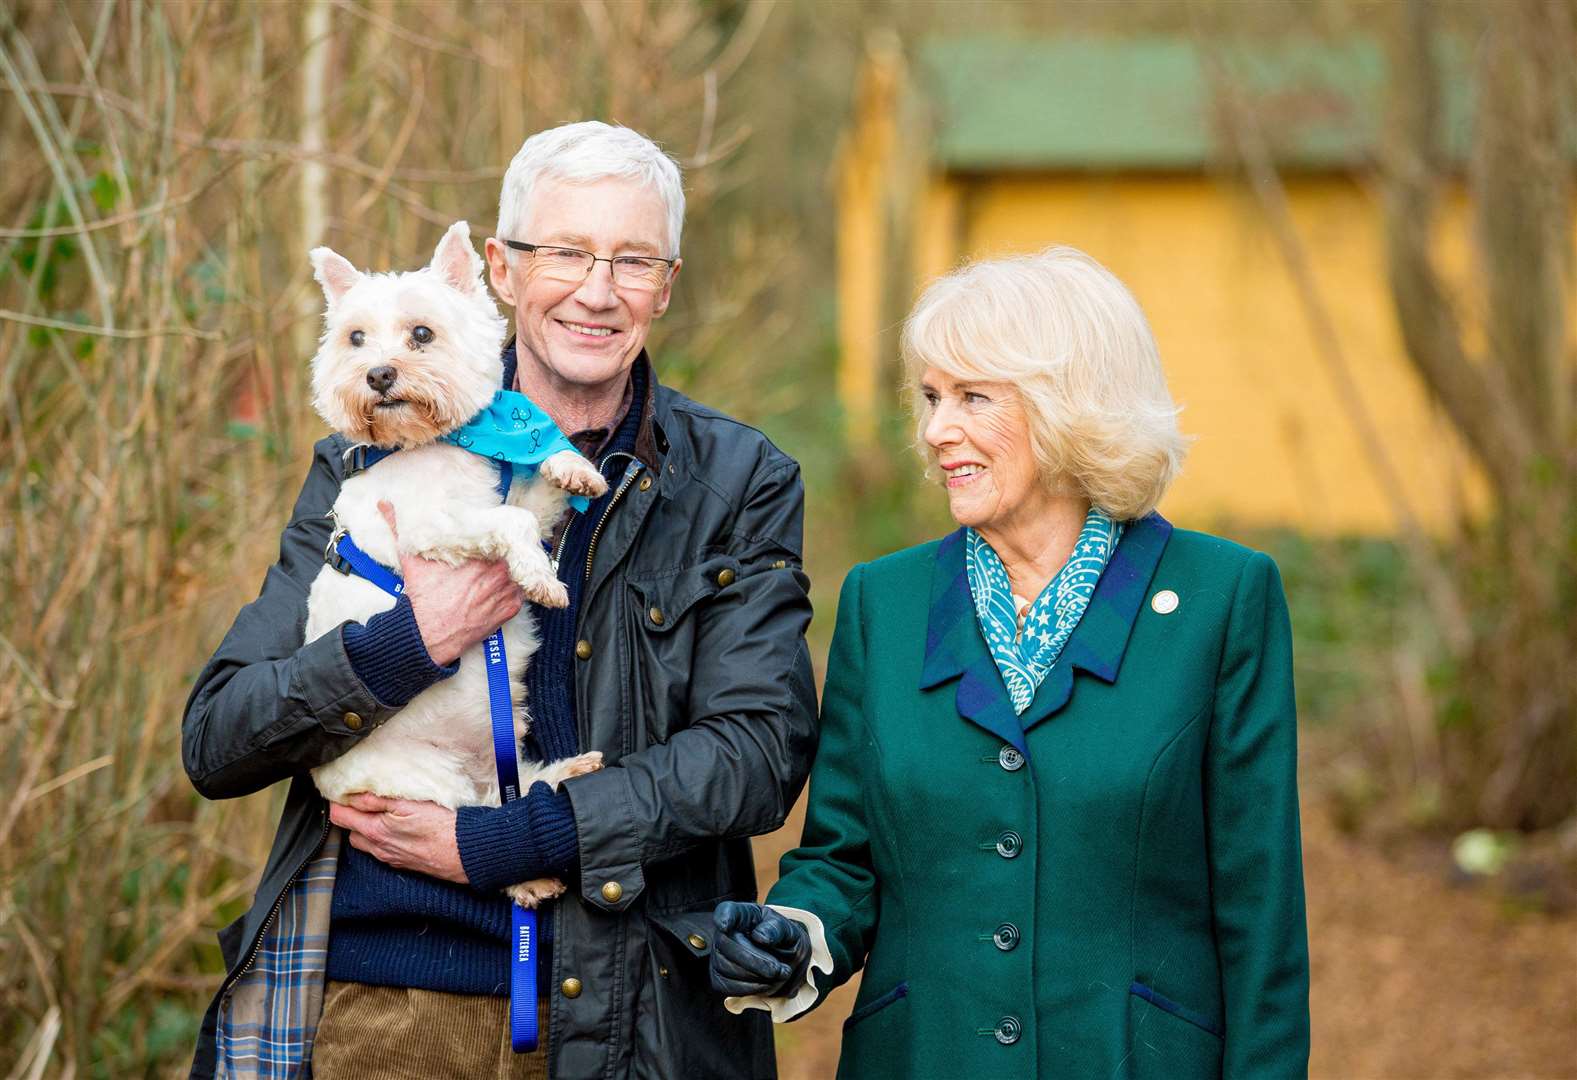 Her Majesty The Queen Consort joins Battersea Ambassador Paul O'Grady and George the West Highland White Terrier at Battersea Brands Hatch site in Kent. Photo: Richard Lea-Hair / Battersea Dogs & Cats Home